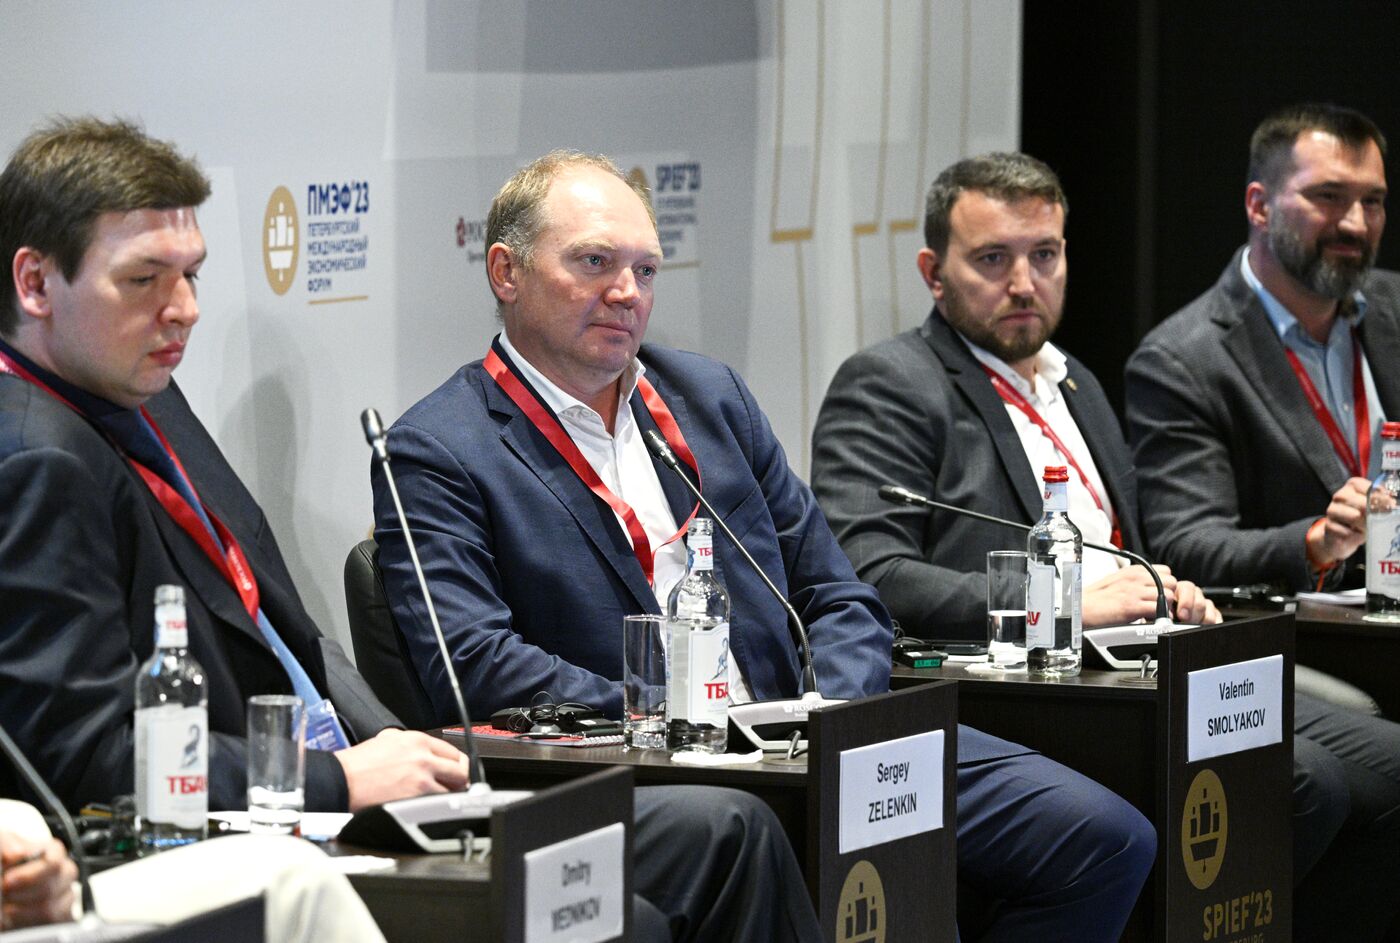 SPIEF-2023. The Role of the Media Industry in Supporting and Developing the SME Segment in Russia